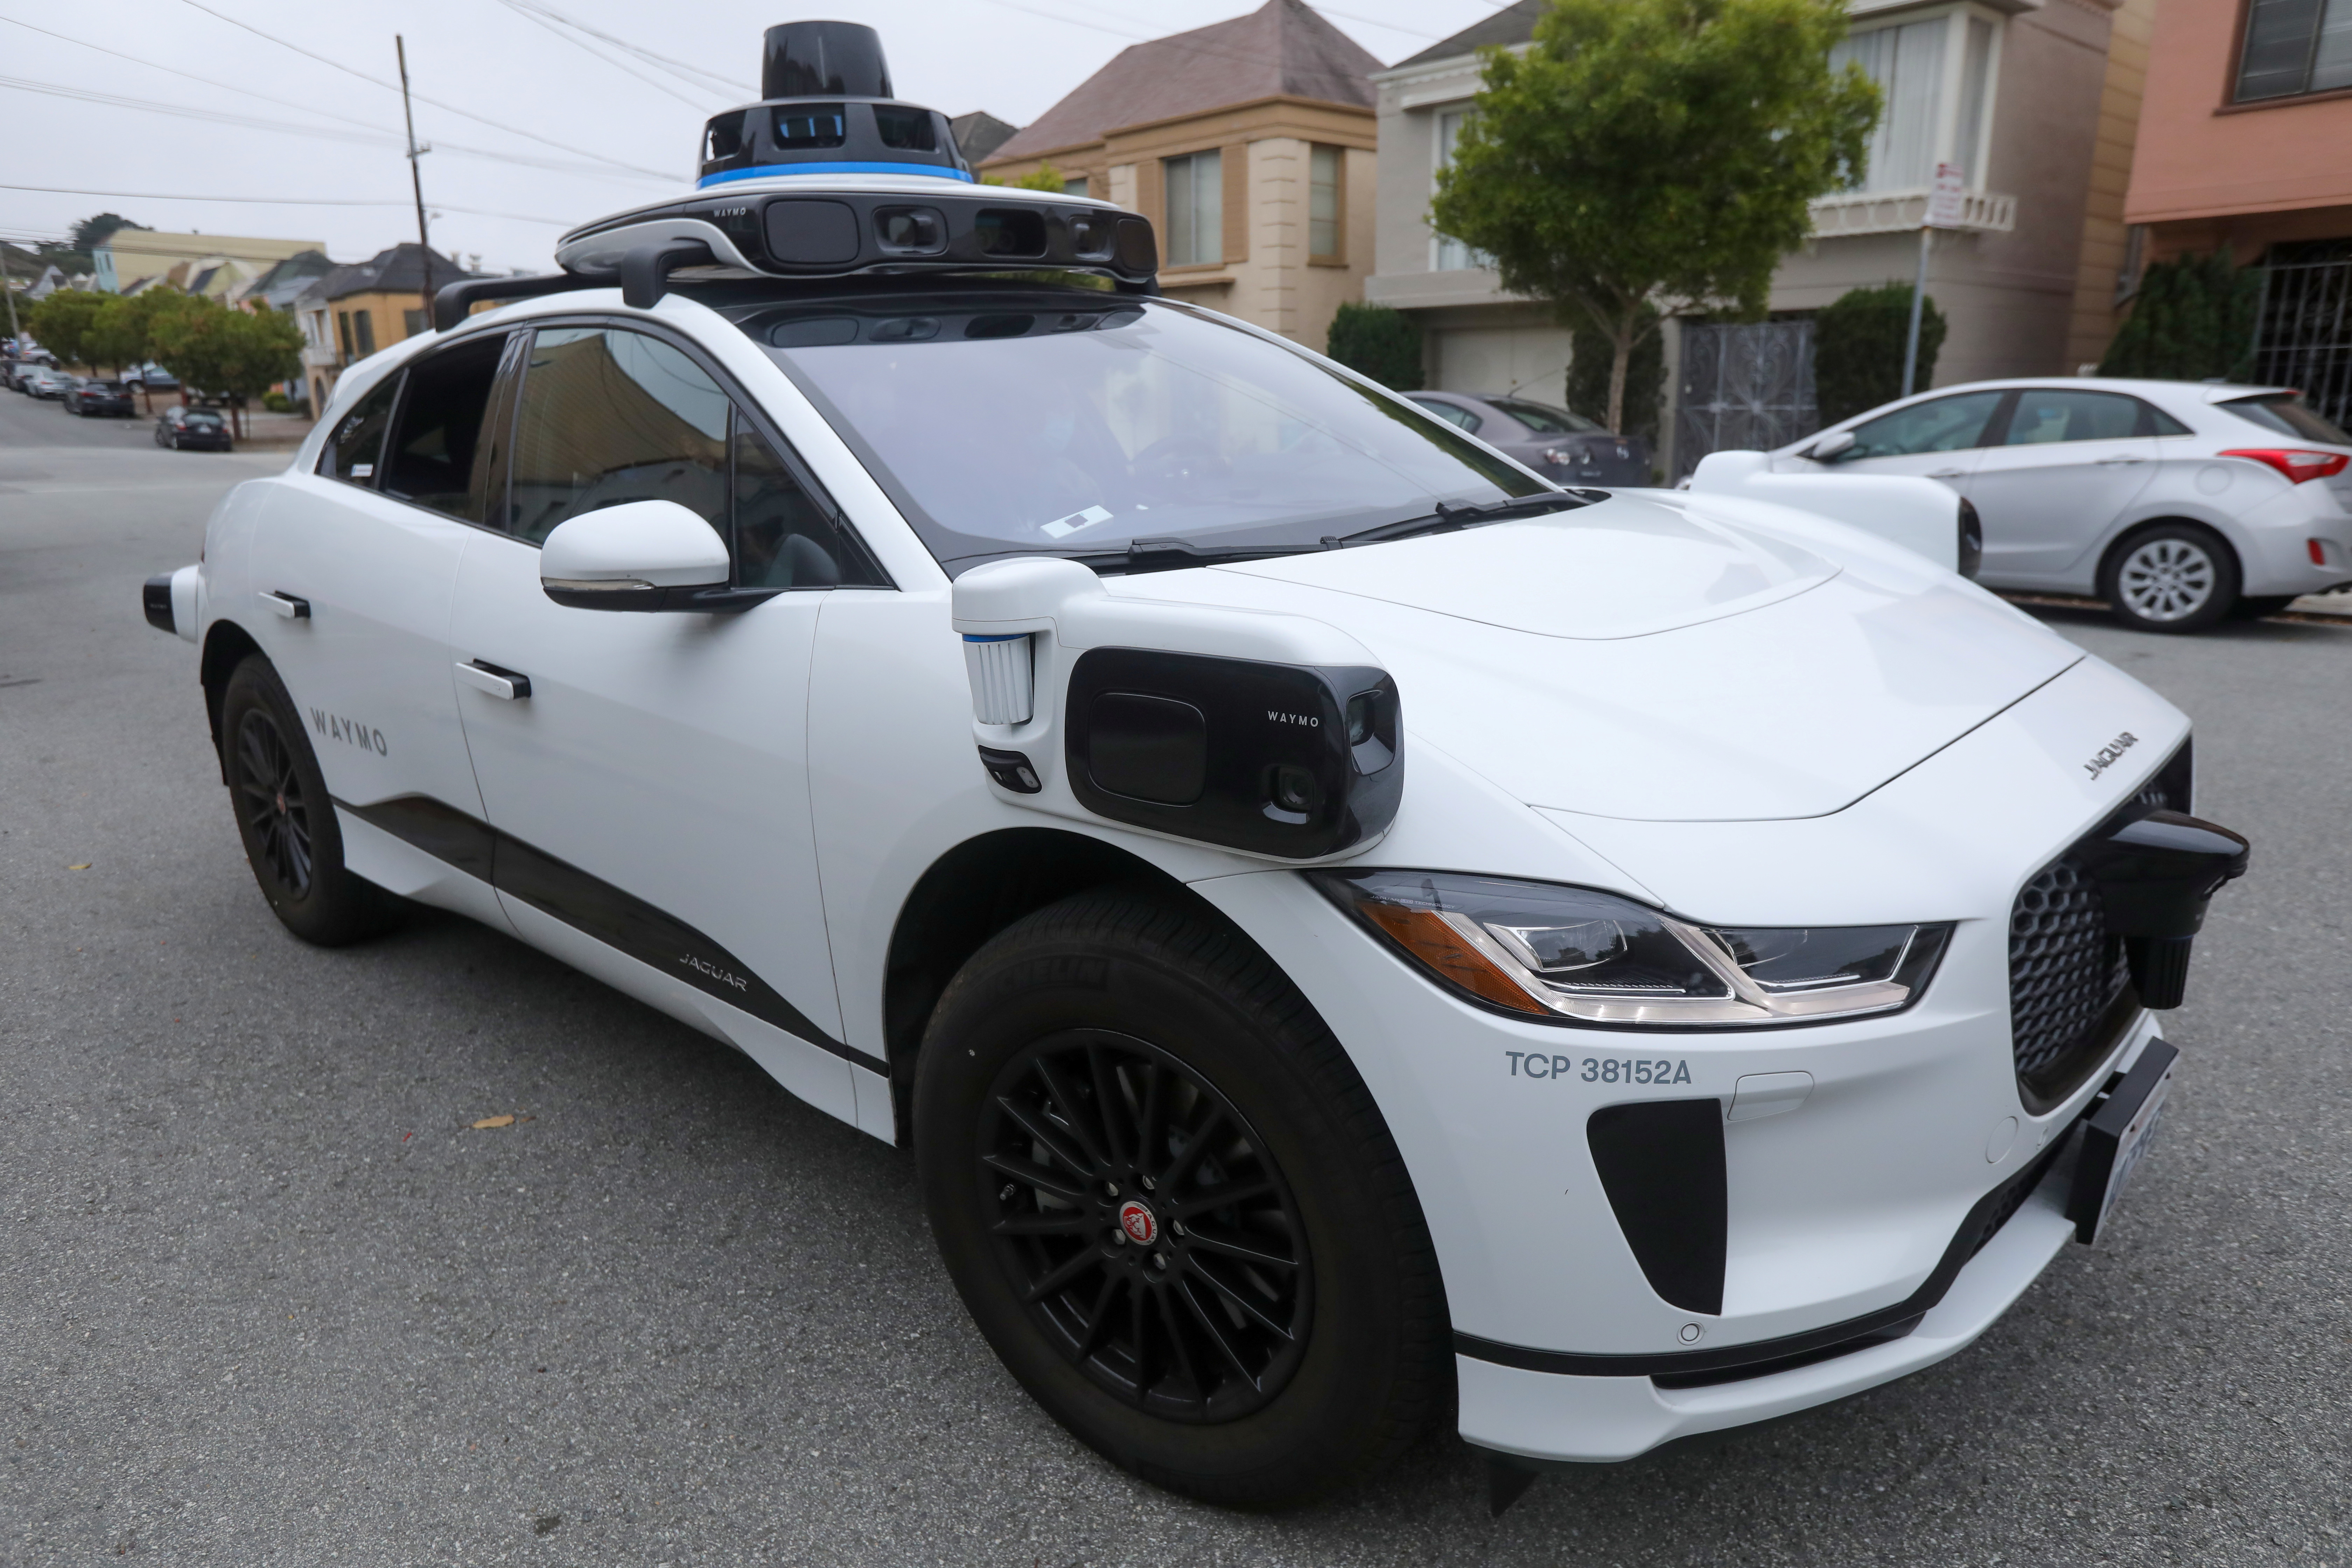 A Waymo Jaguar I-Pace SUV is seen driving on a road in San Francisco